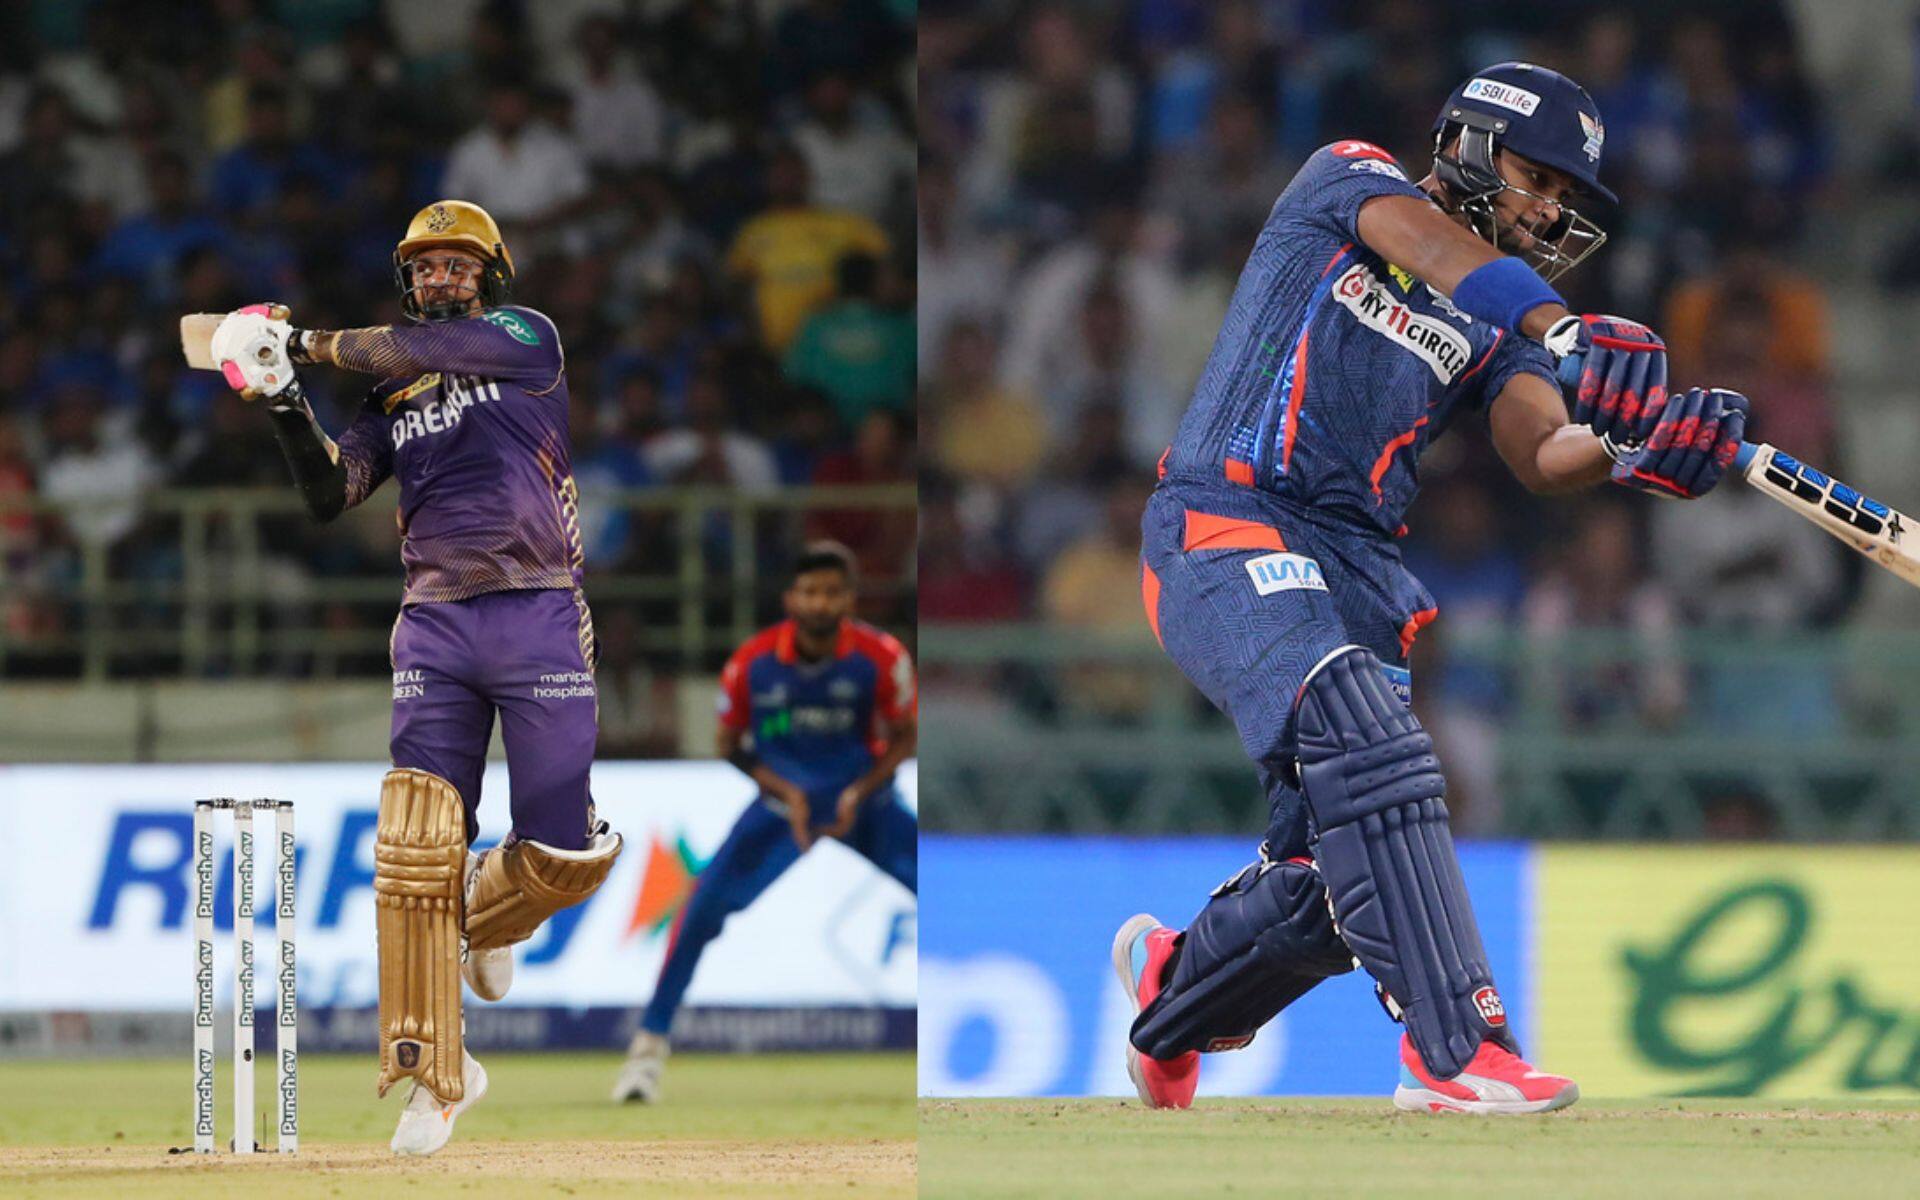 Sunil Narine and Nicholas Pooran will be crucial to their teams in the match [AP Photos]